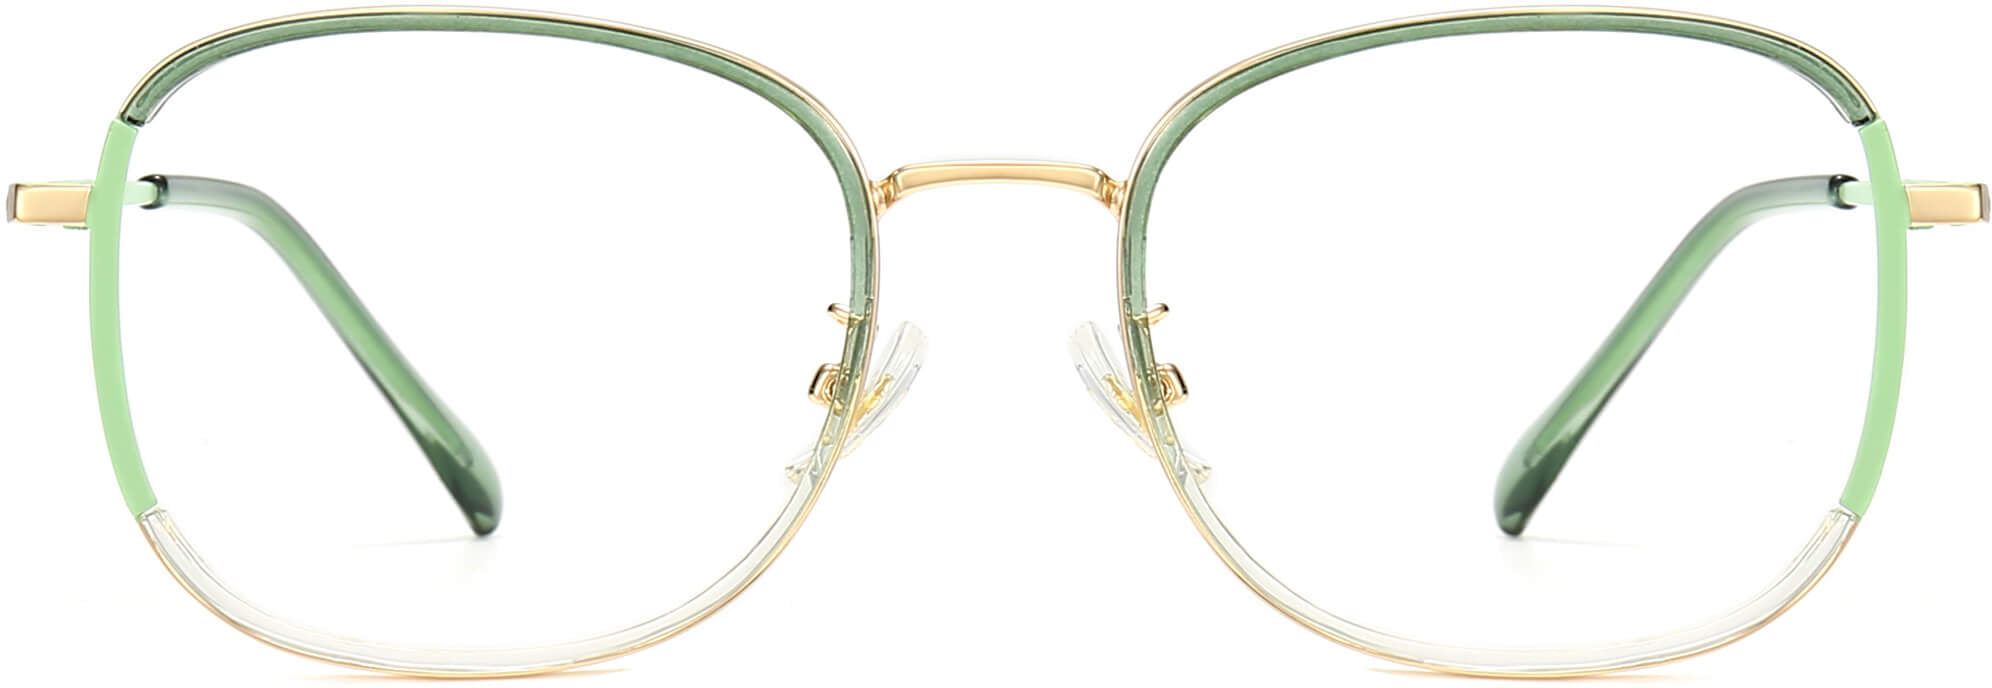 Irene Round Green Eyeglasses from ANRRI, front view